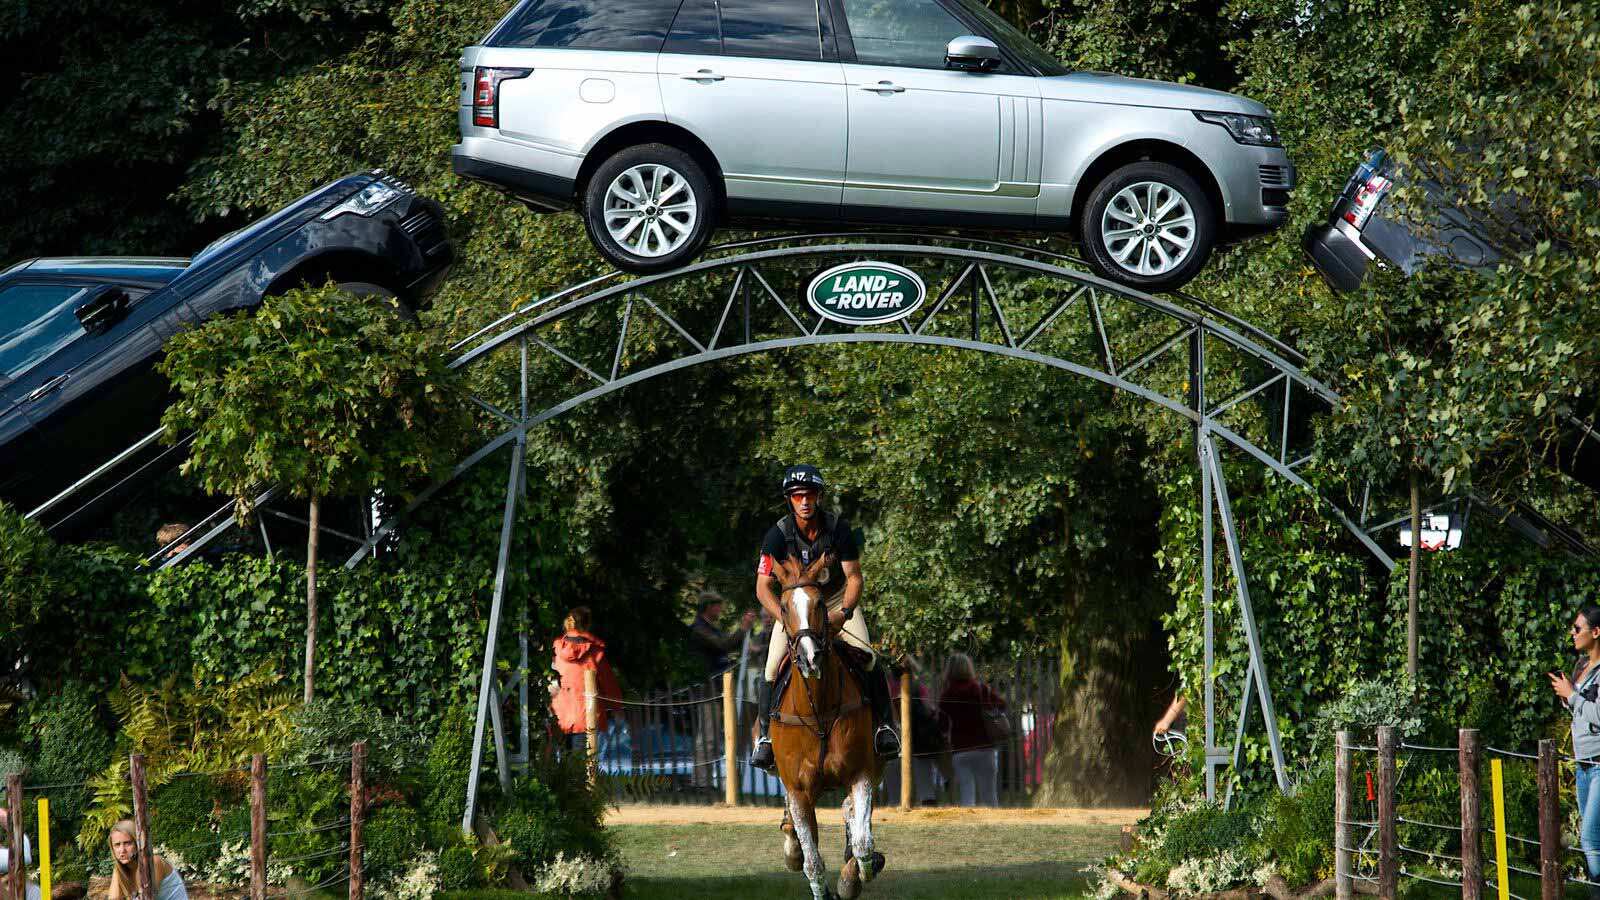 Equestrian rider under an archway of Land Rover vehicles.